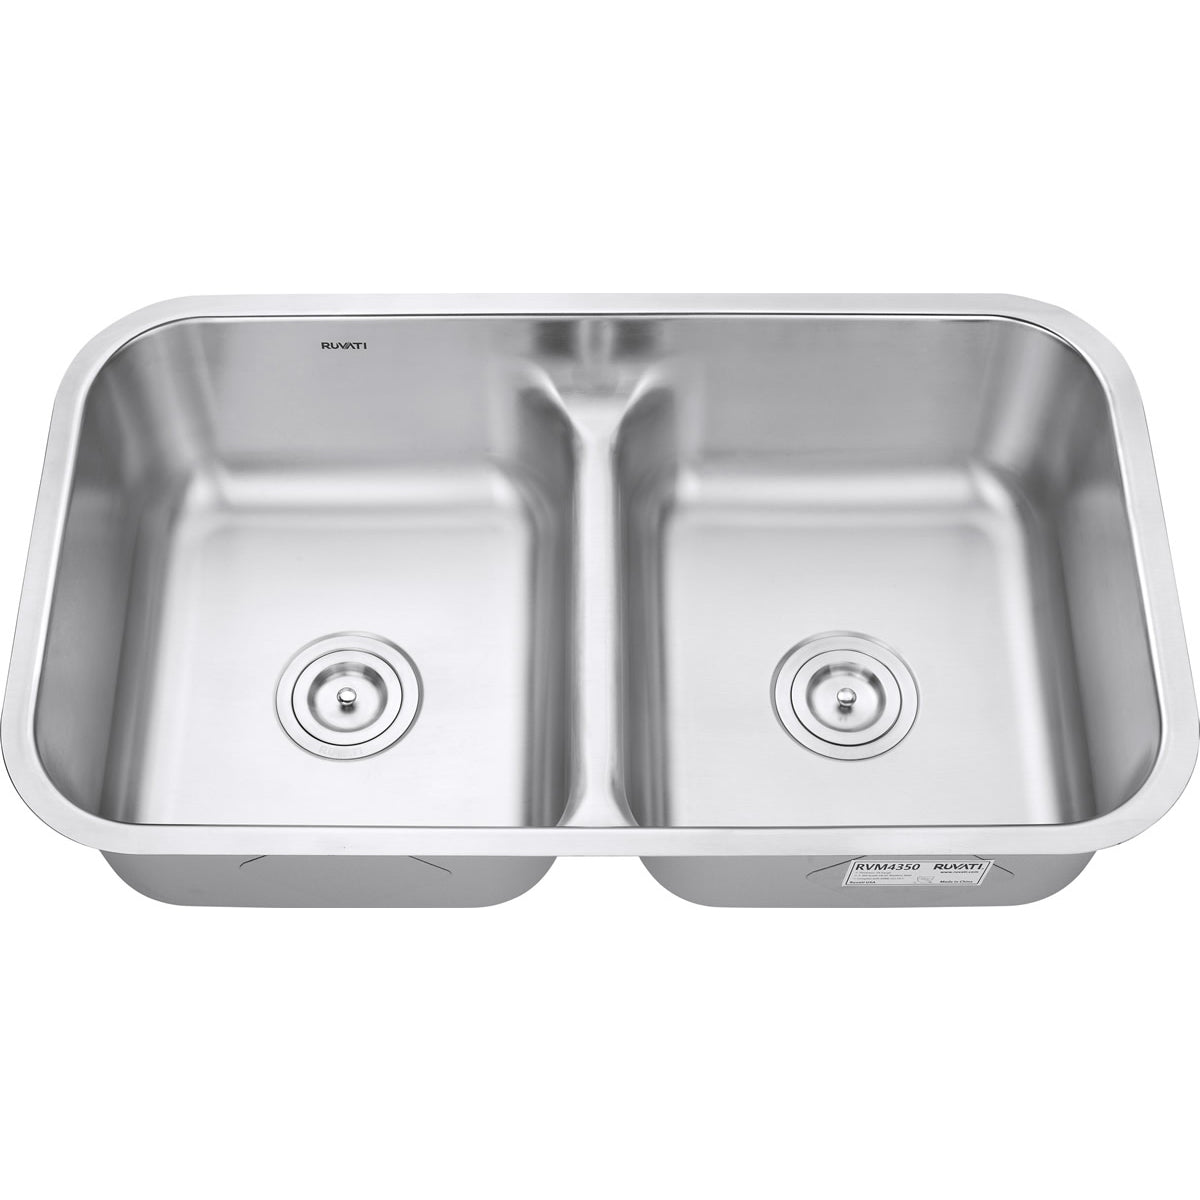 32 inch Stainless Steel Undermount Large Double Bowl Low Divider Kitchen Sink - Classic 32L 50/50